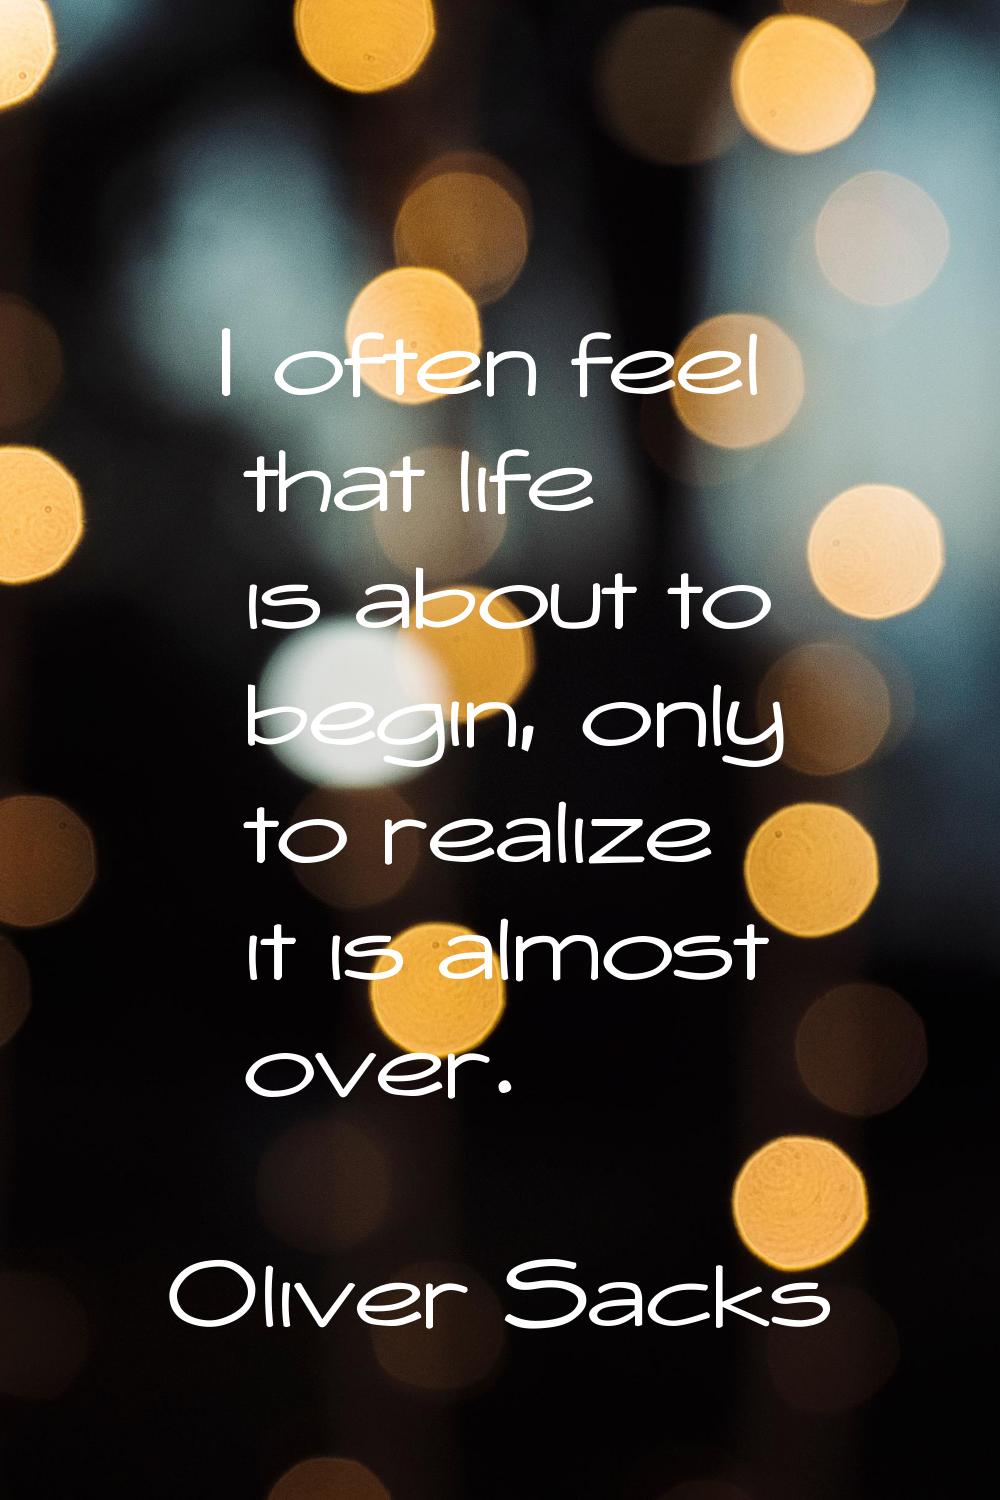 I often feel that life is about to begin, only to realize it is almost over.